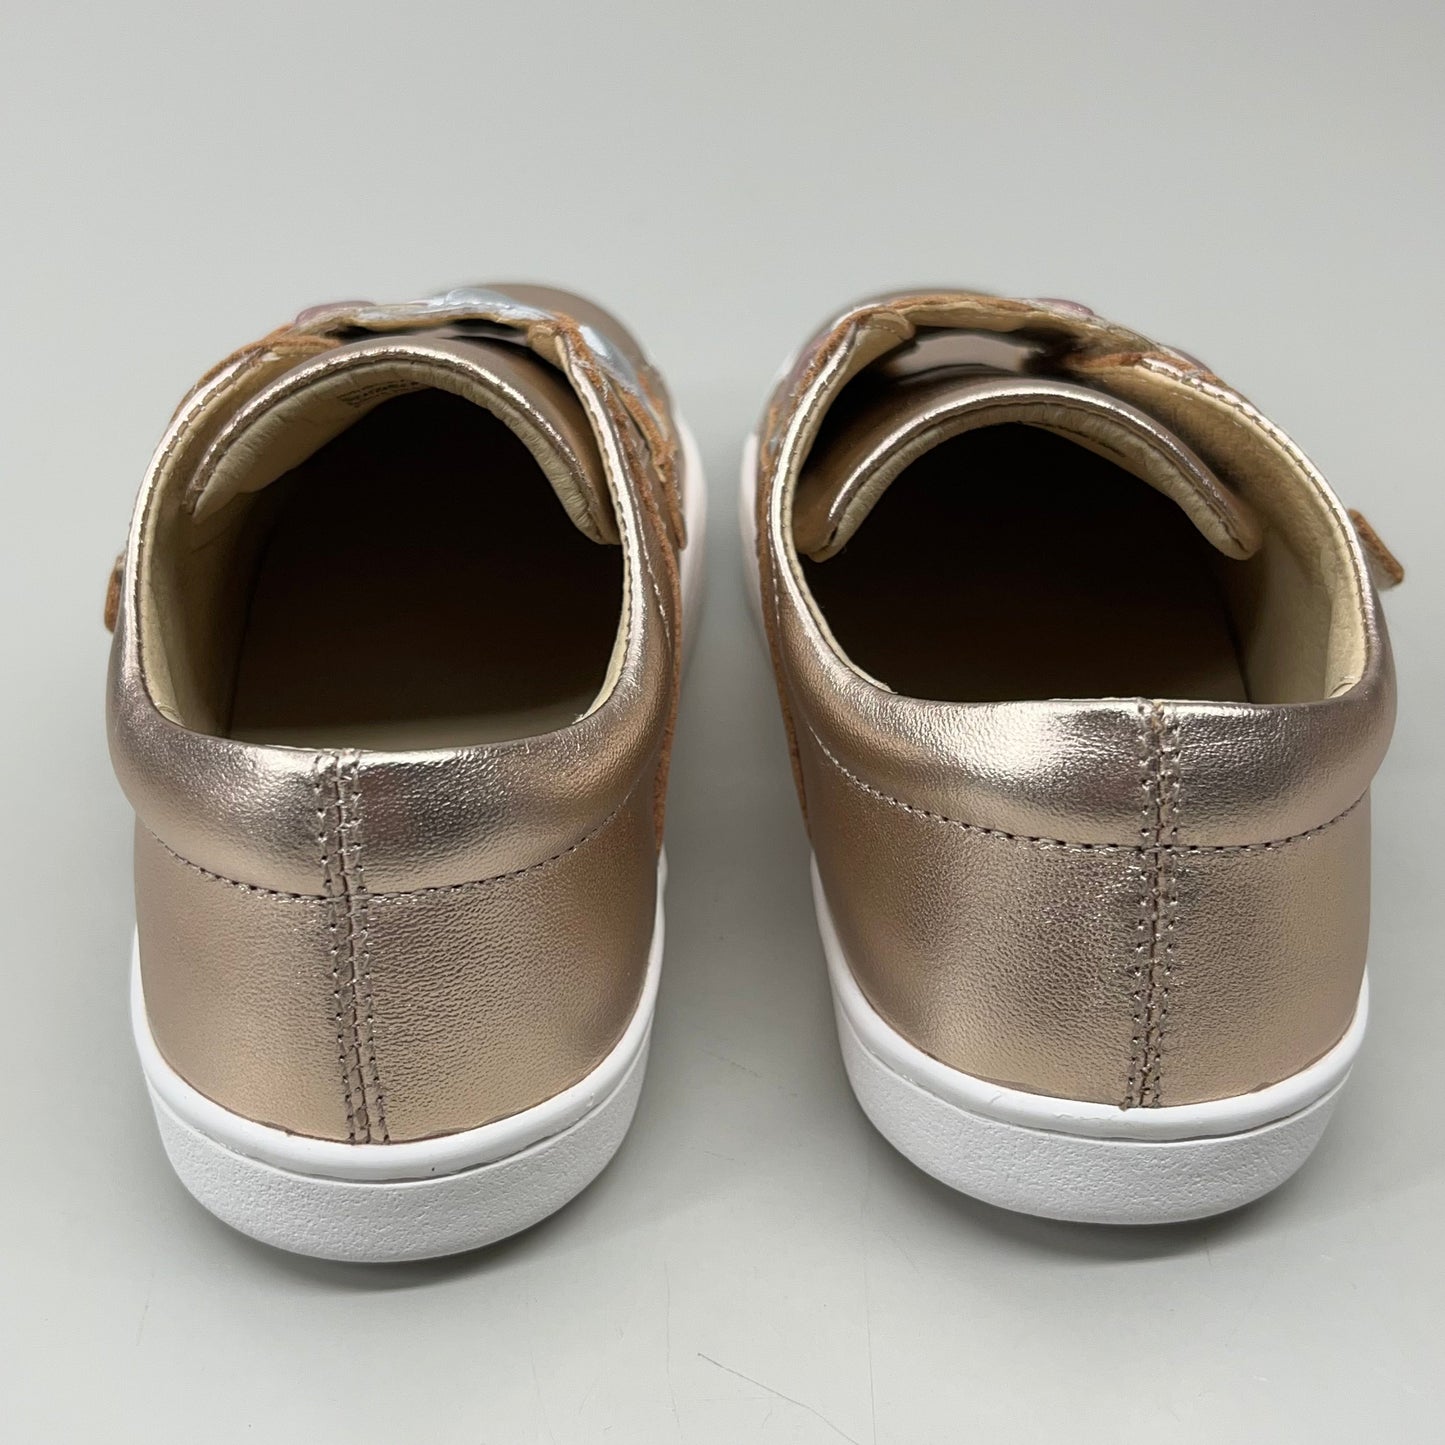 OLD SOLES Igster Sneakers Kid's Leather Shoe Sz 22 US 6 Copper/Silver/Pink Frost #6132